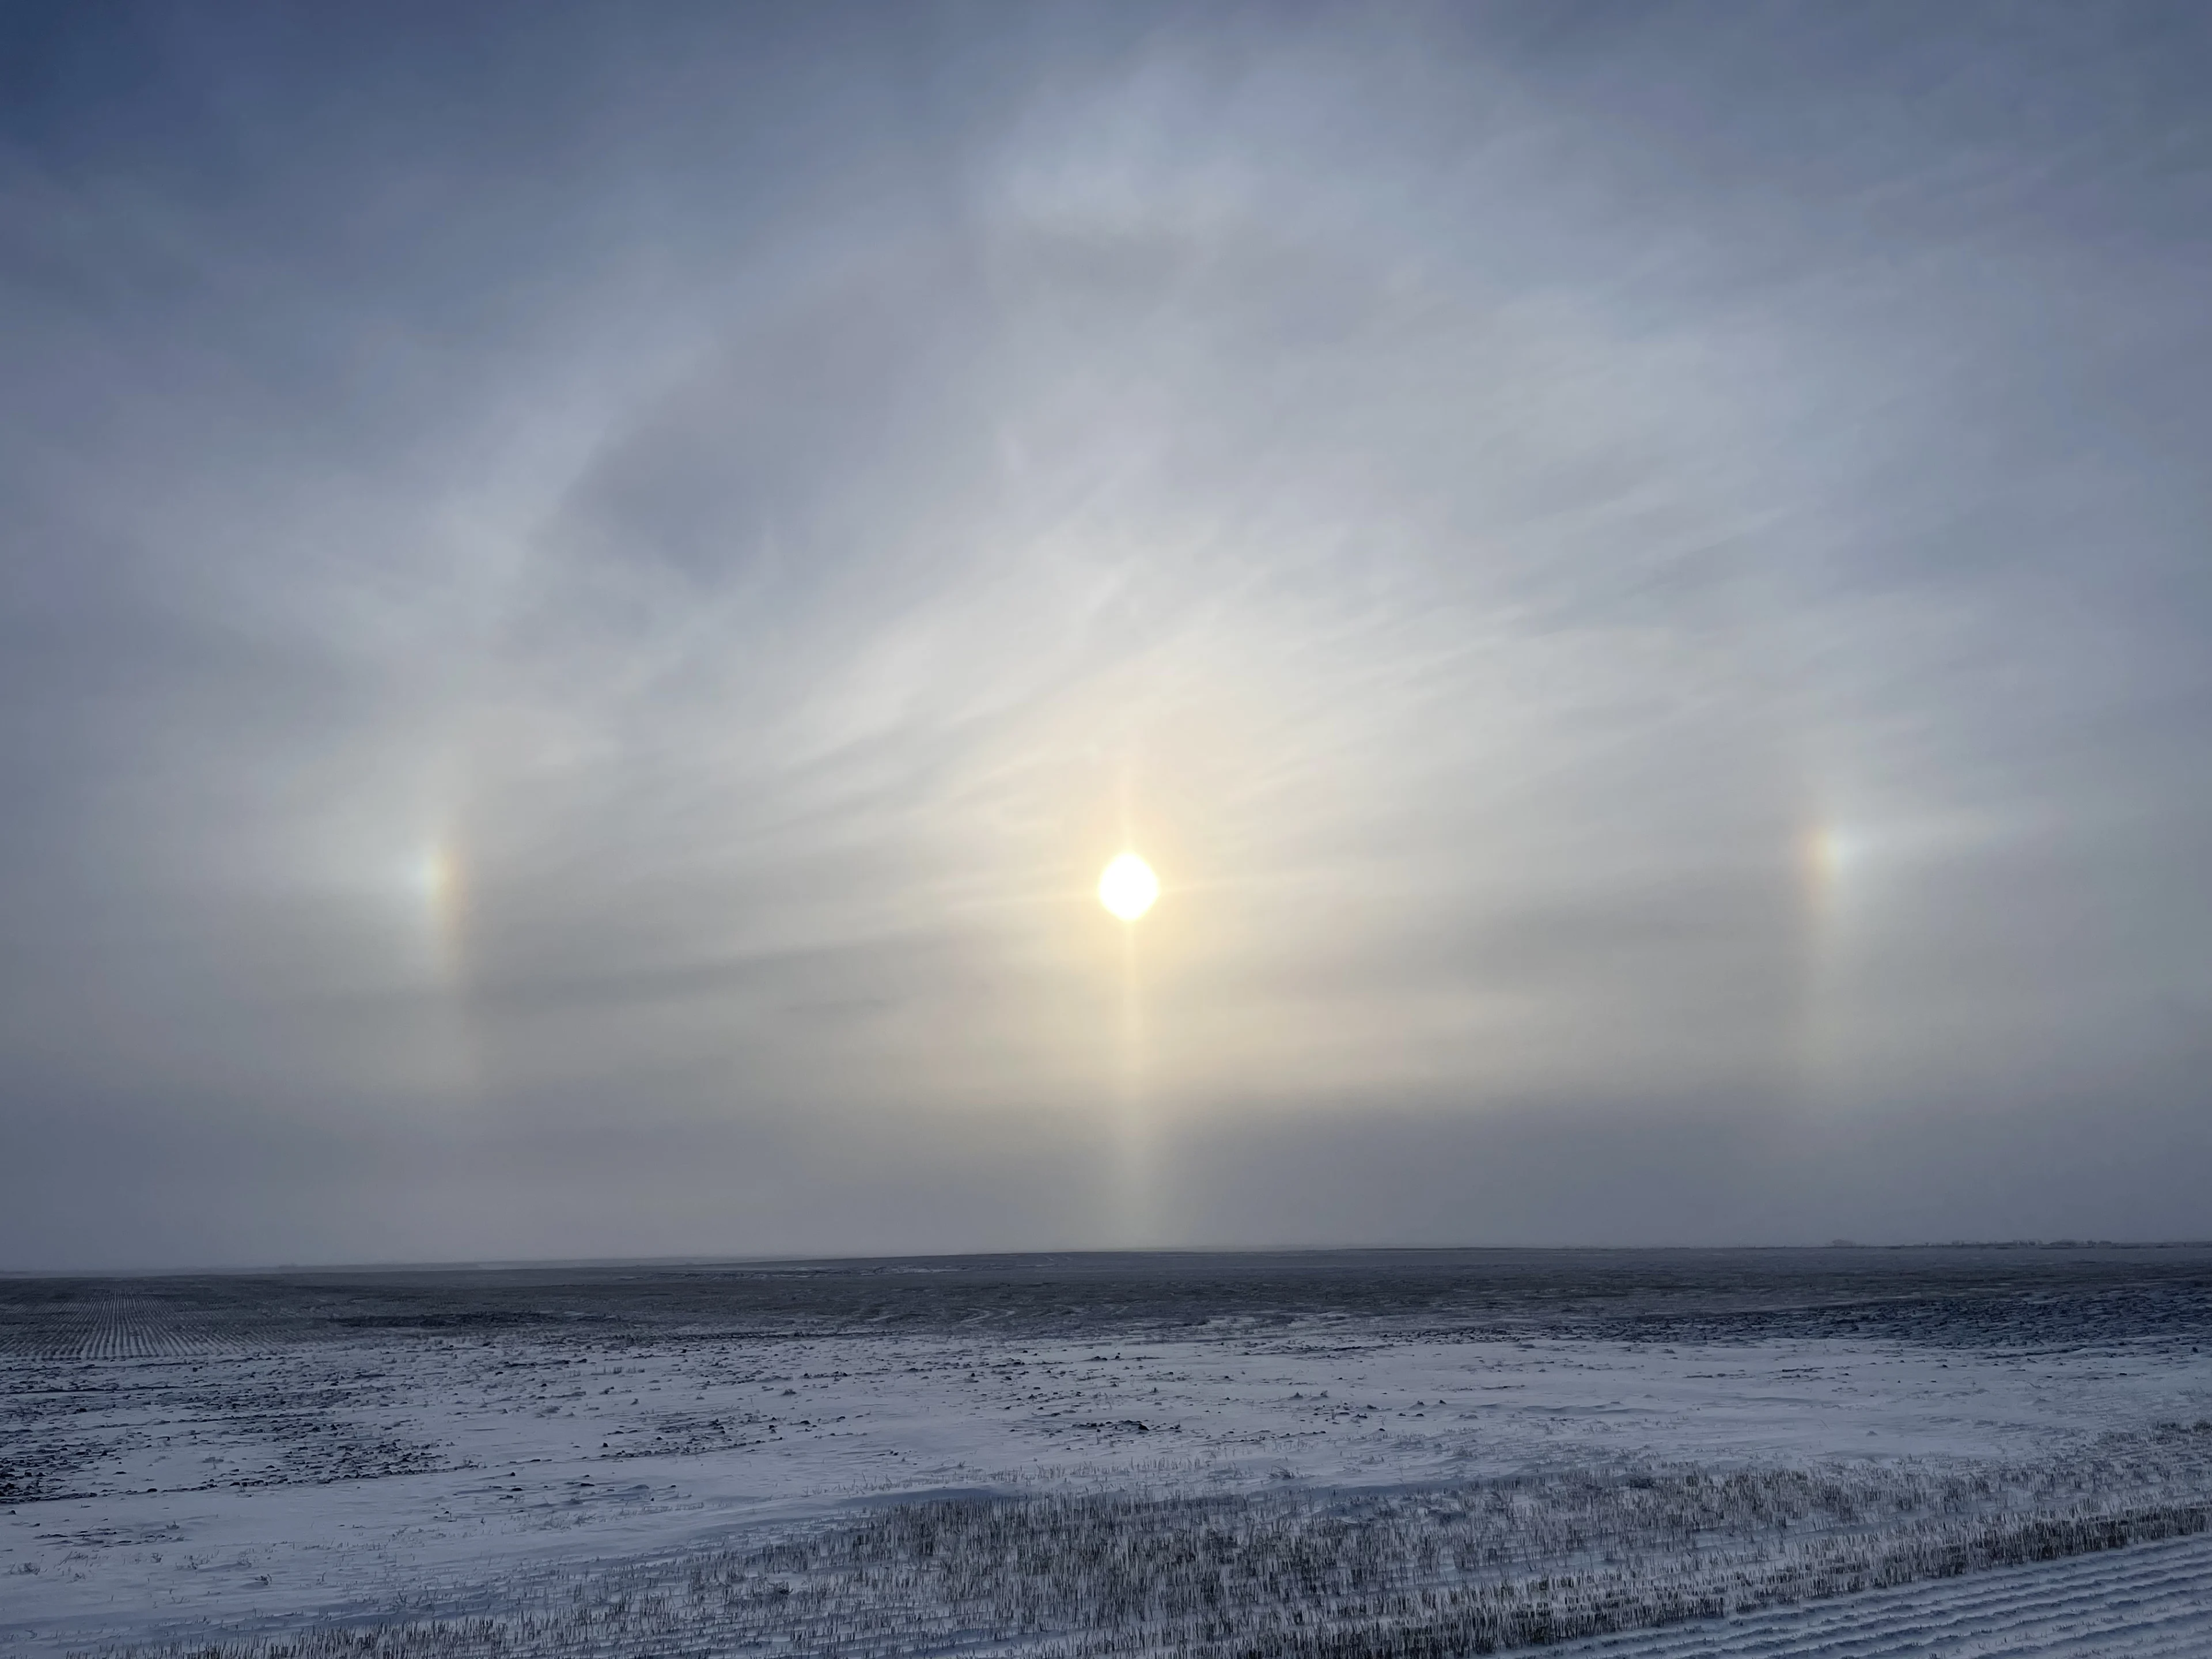 From light pillars to sun dogs: cold creates dazzling scenes in western Canada